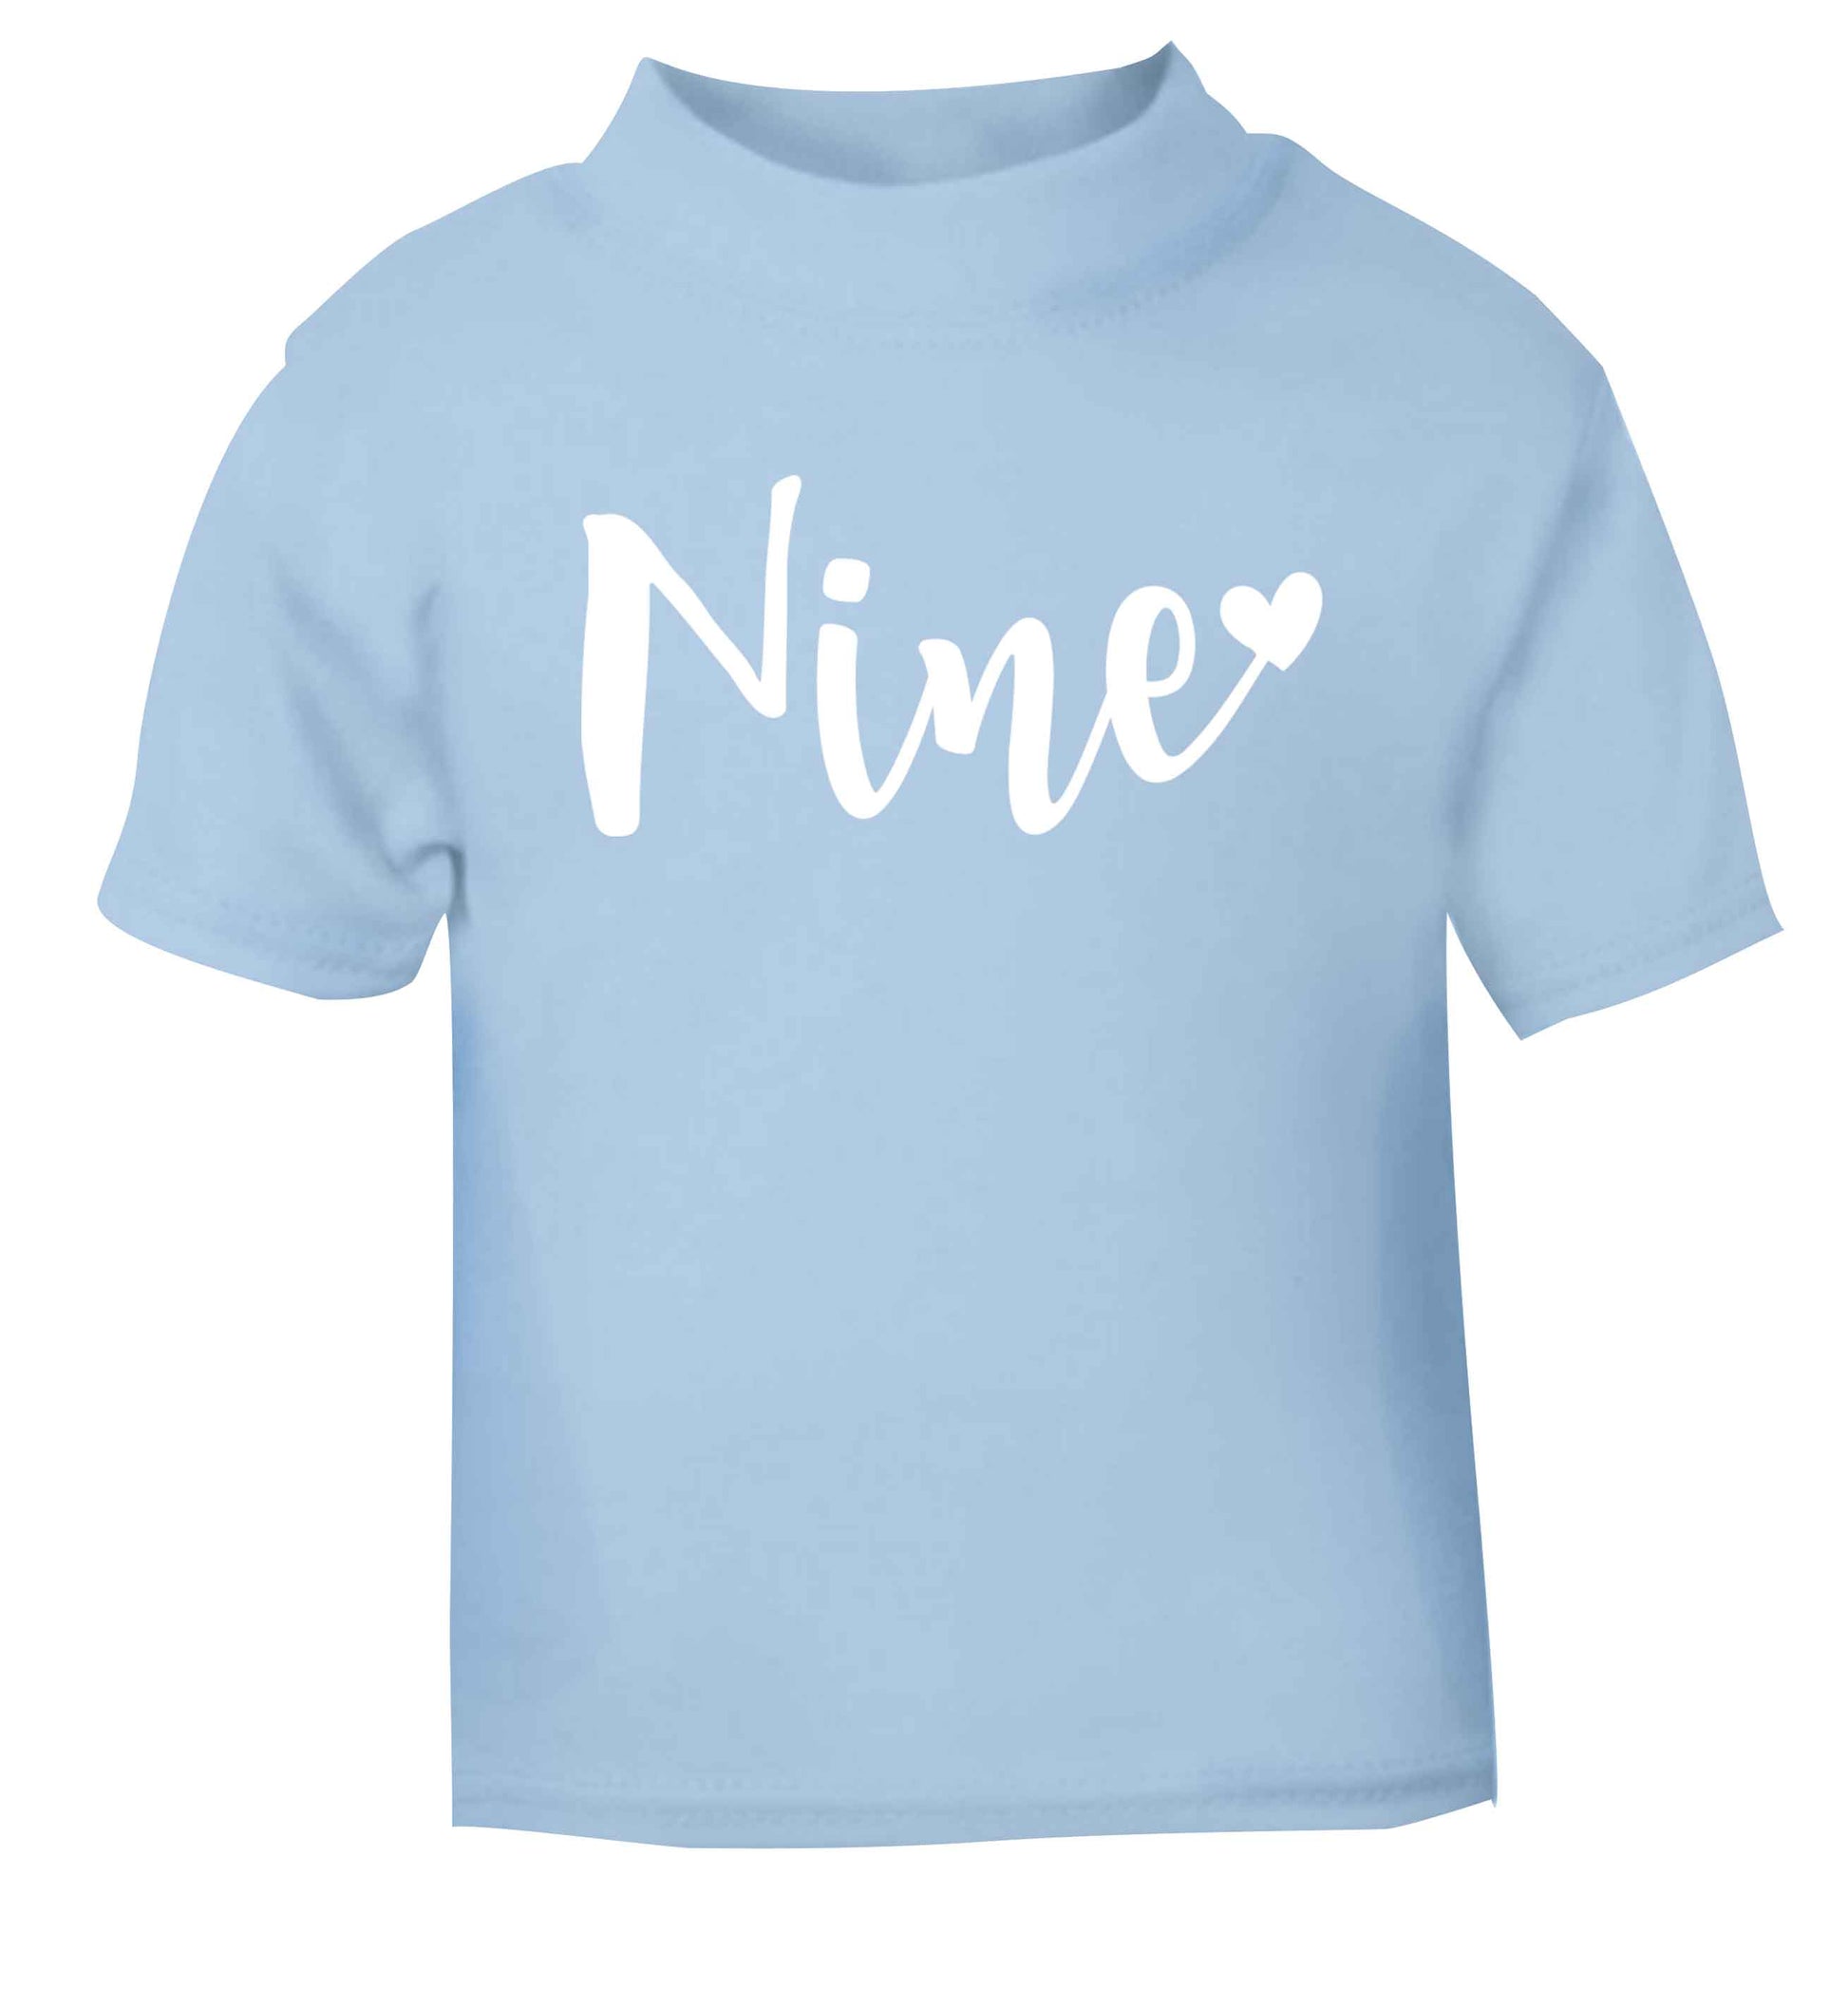 Nine and heart light blue baby toddler Tshirt 2 Years